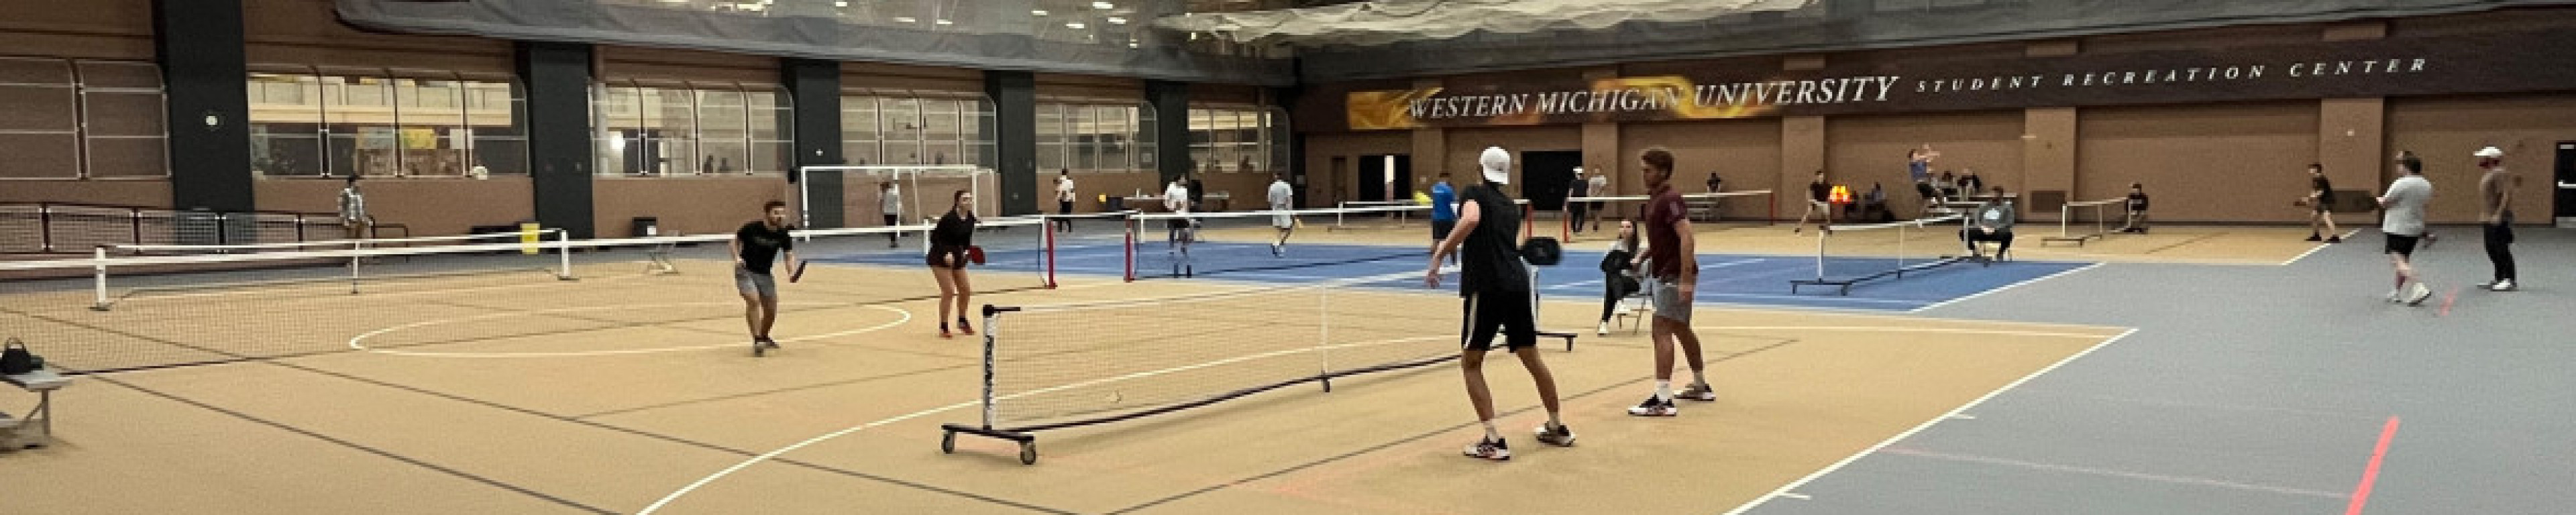 Group of people playing Pickleball on the pickleball court.